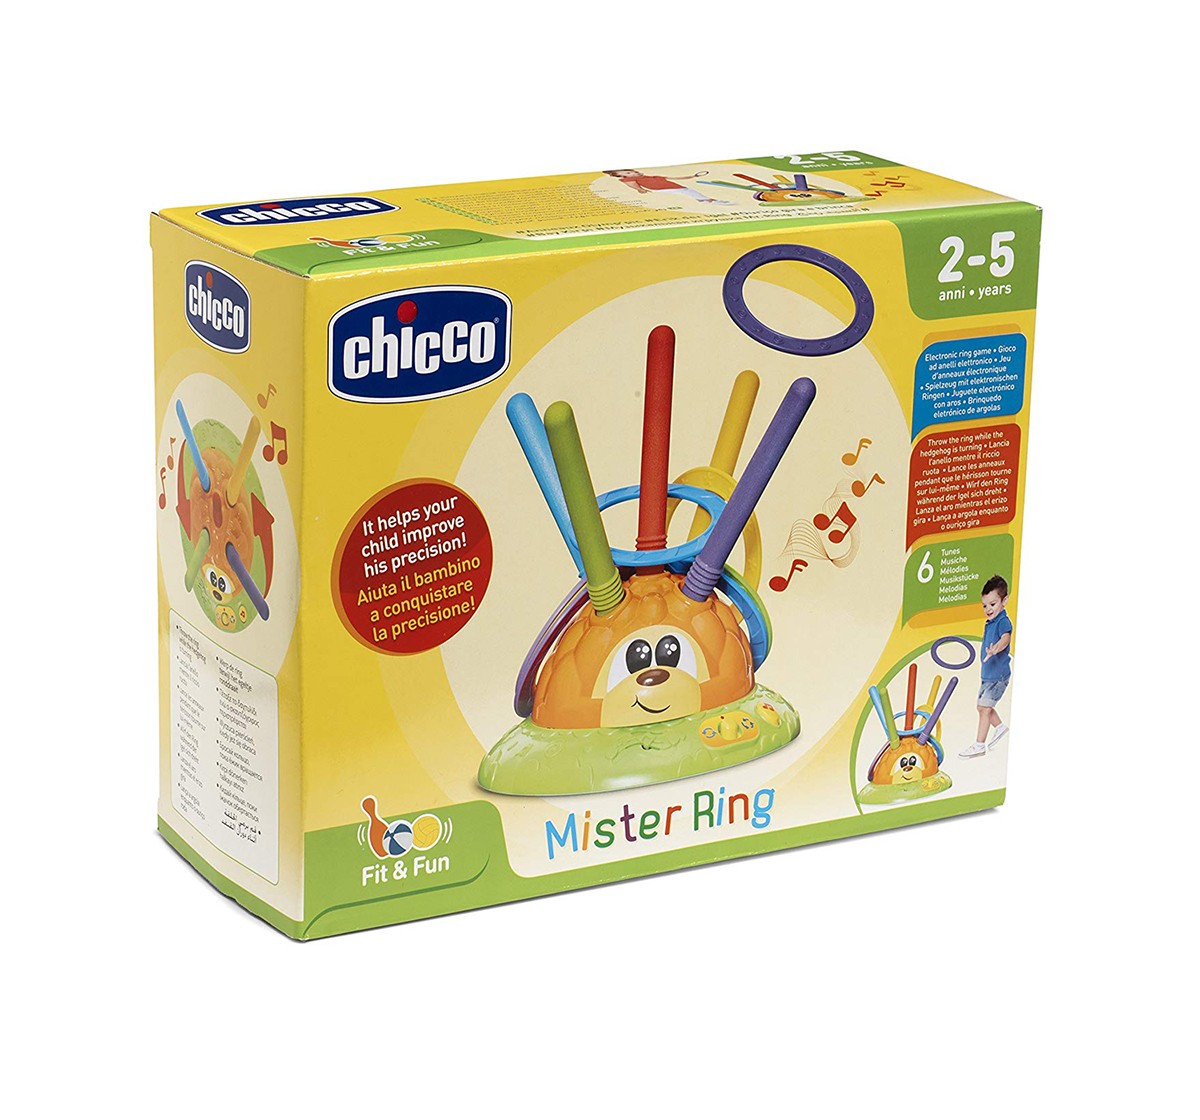 Chicco Mister Ring Activity Toy for Kids age 24M+ 